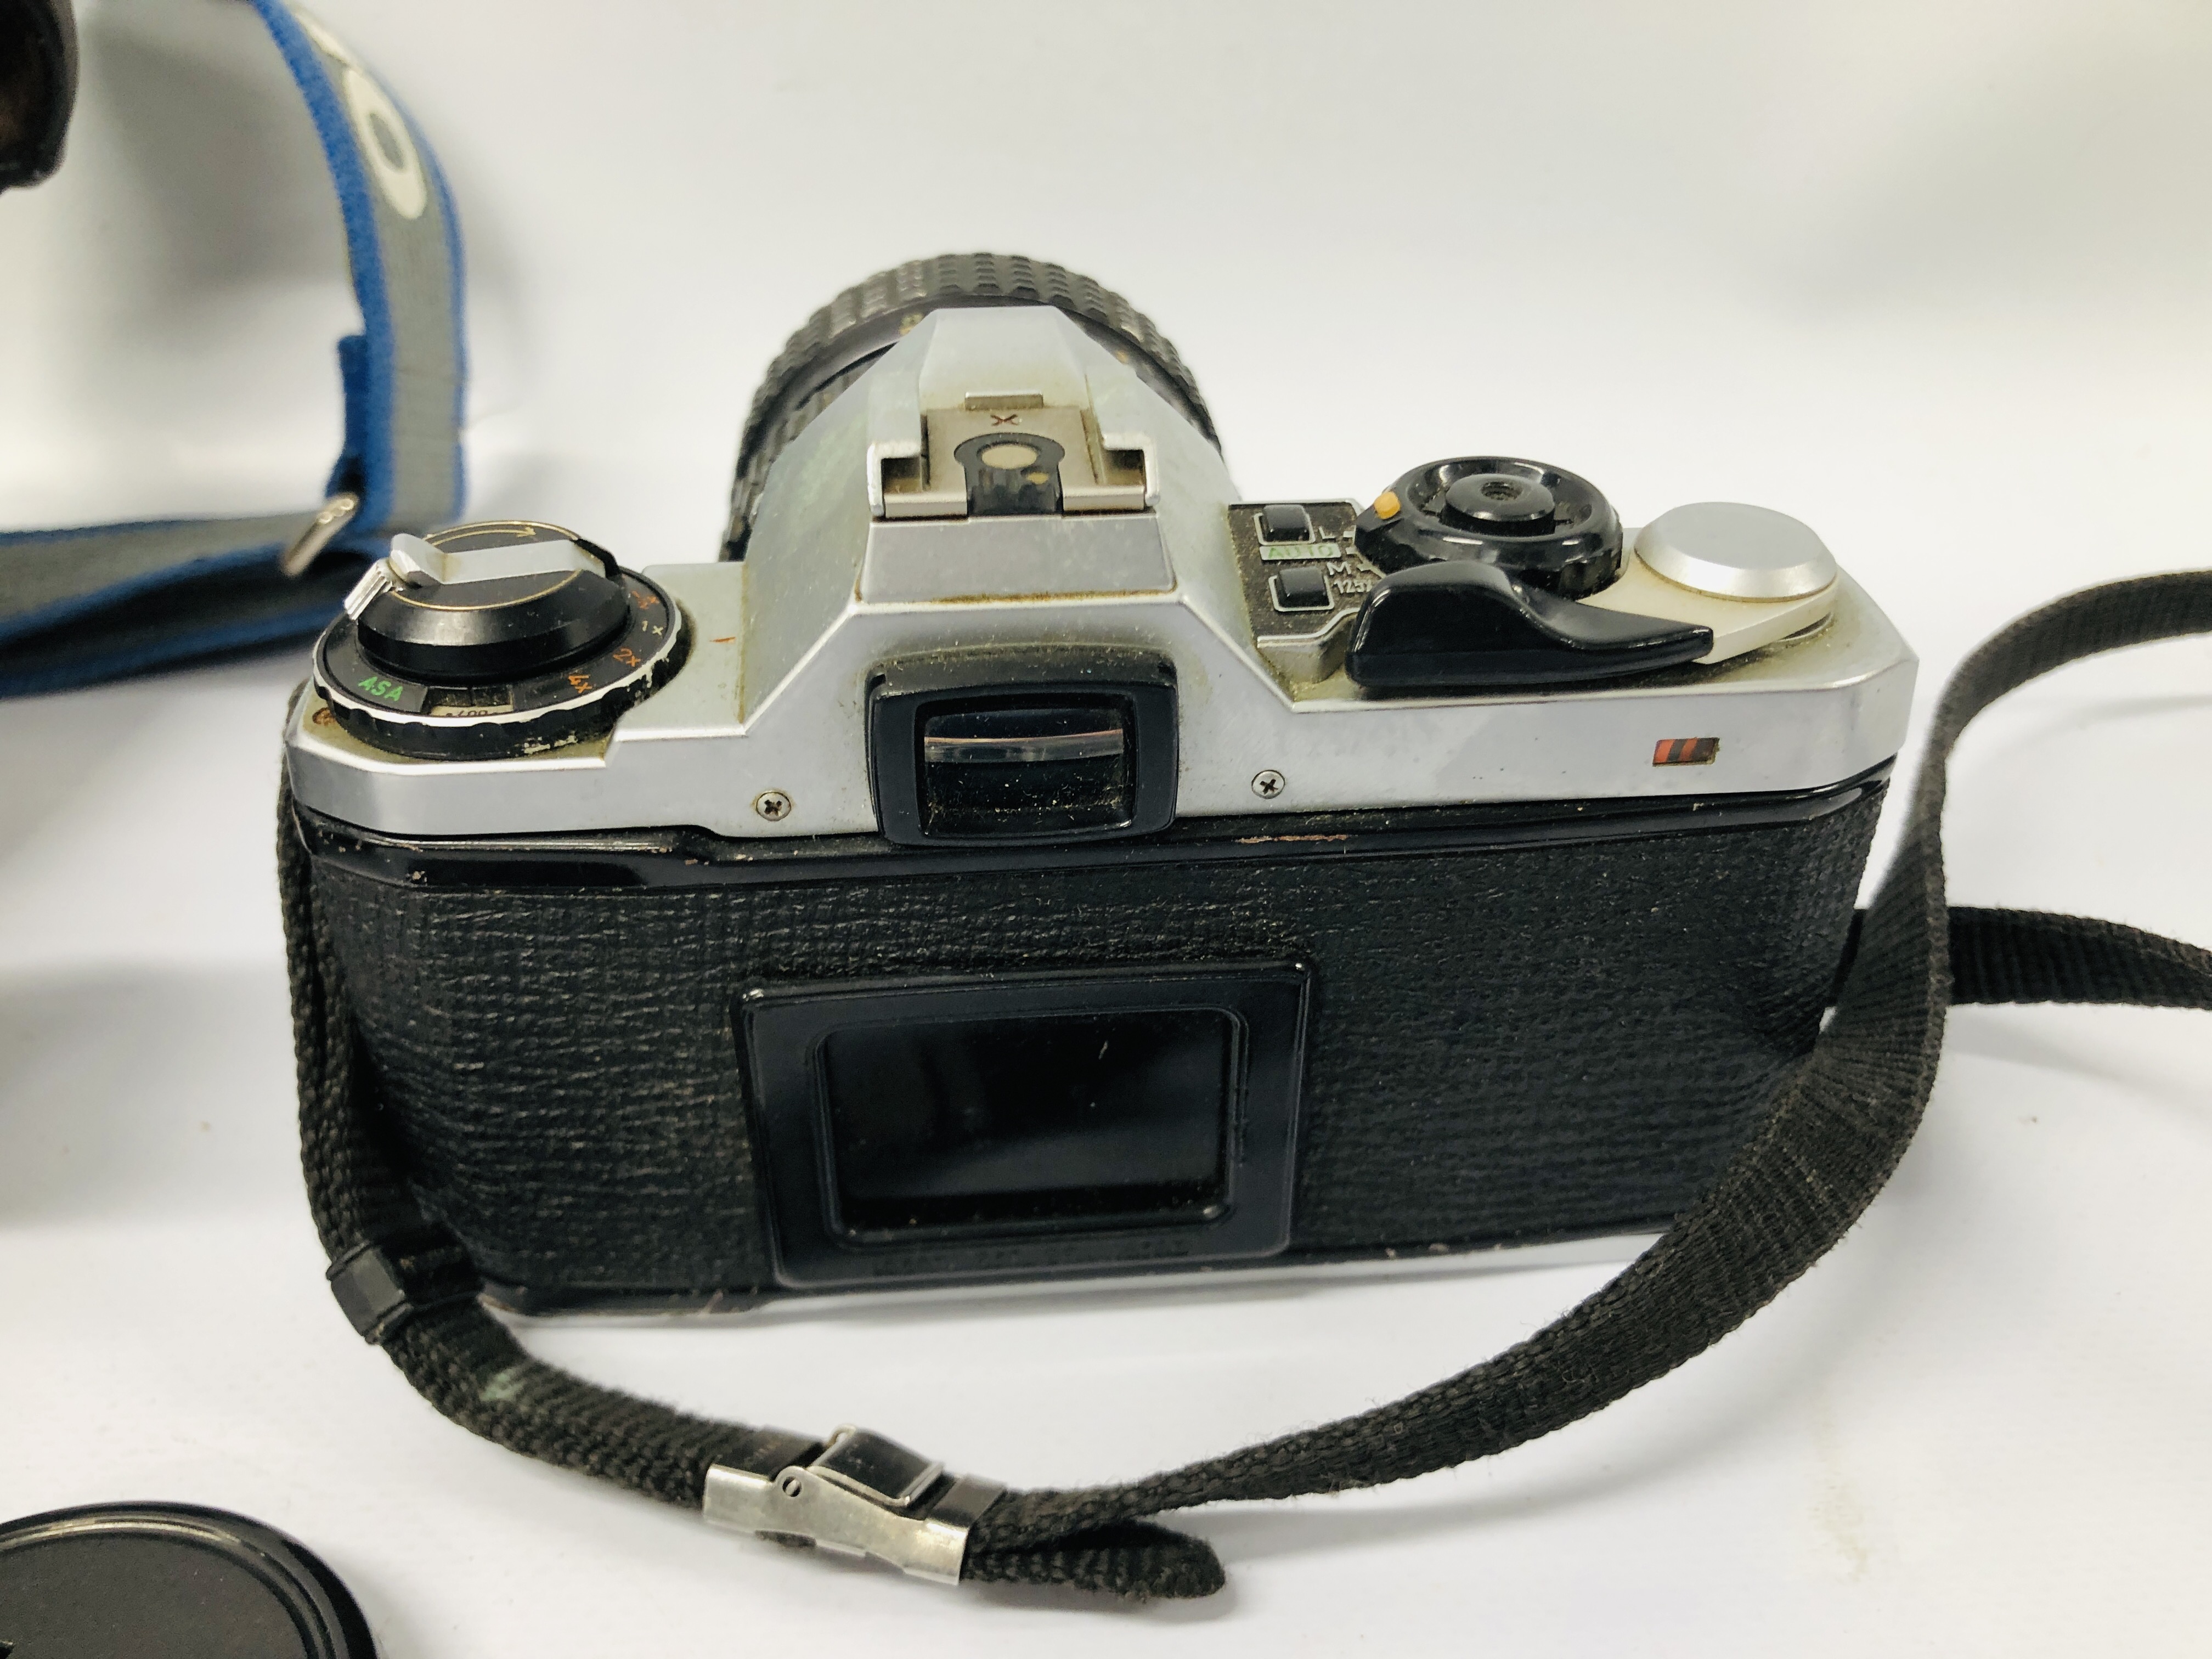 2 X DIGITAL CAMERAS - OLYMPUS OM-2N SLR 35MM CAMERA AND LEATHER CASE, - Image 4 of 8